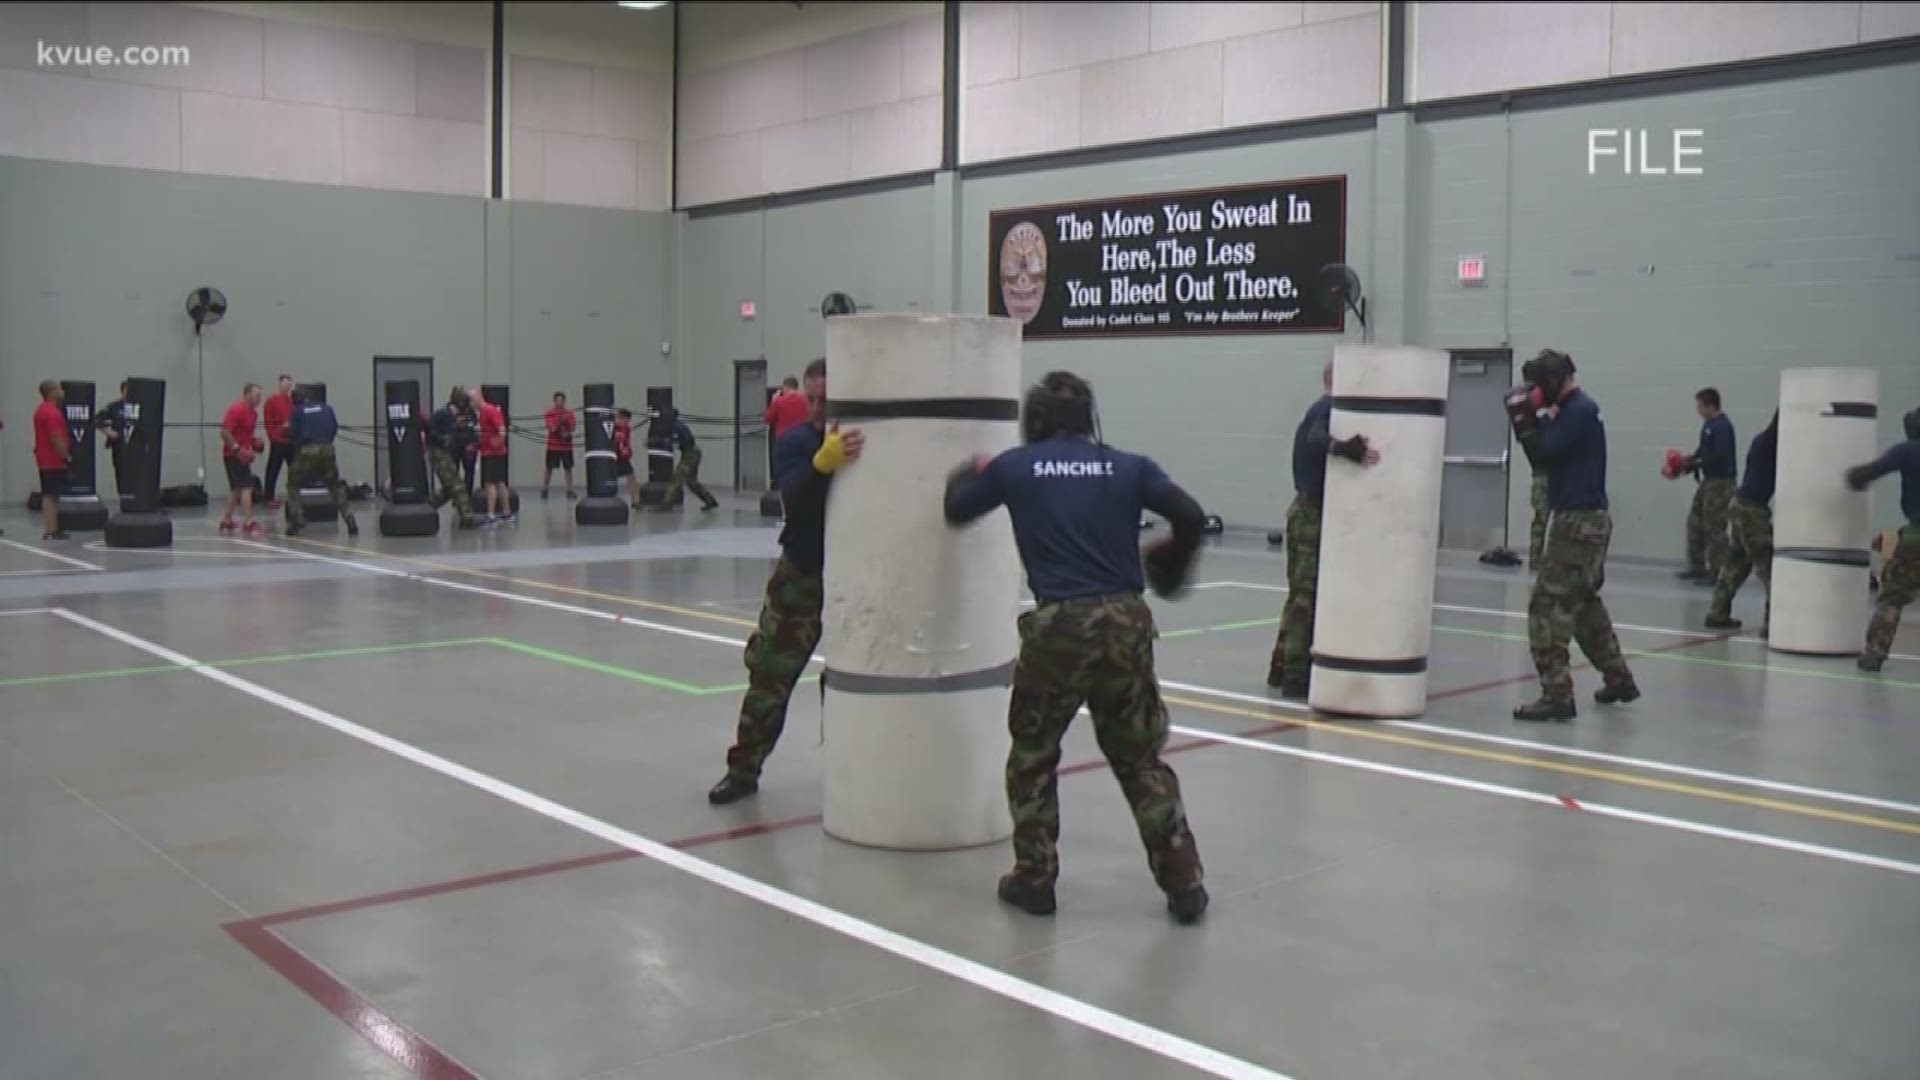 Nearly 40 percent of APD's current cadet class has dropped out.